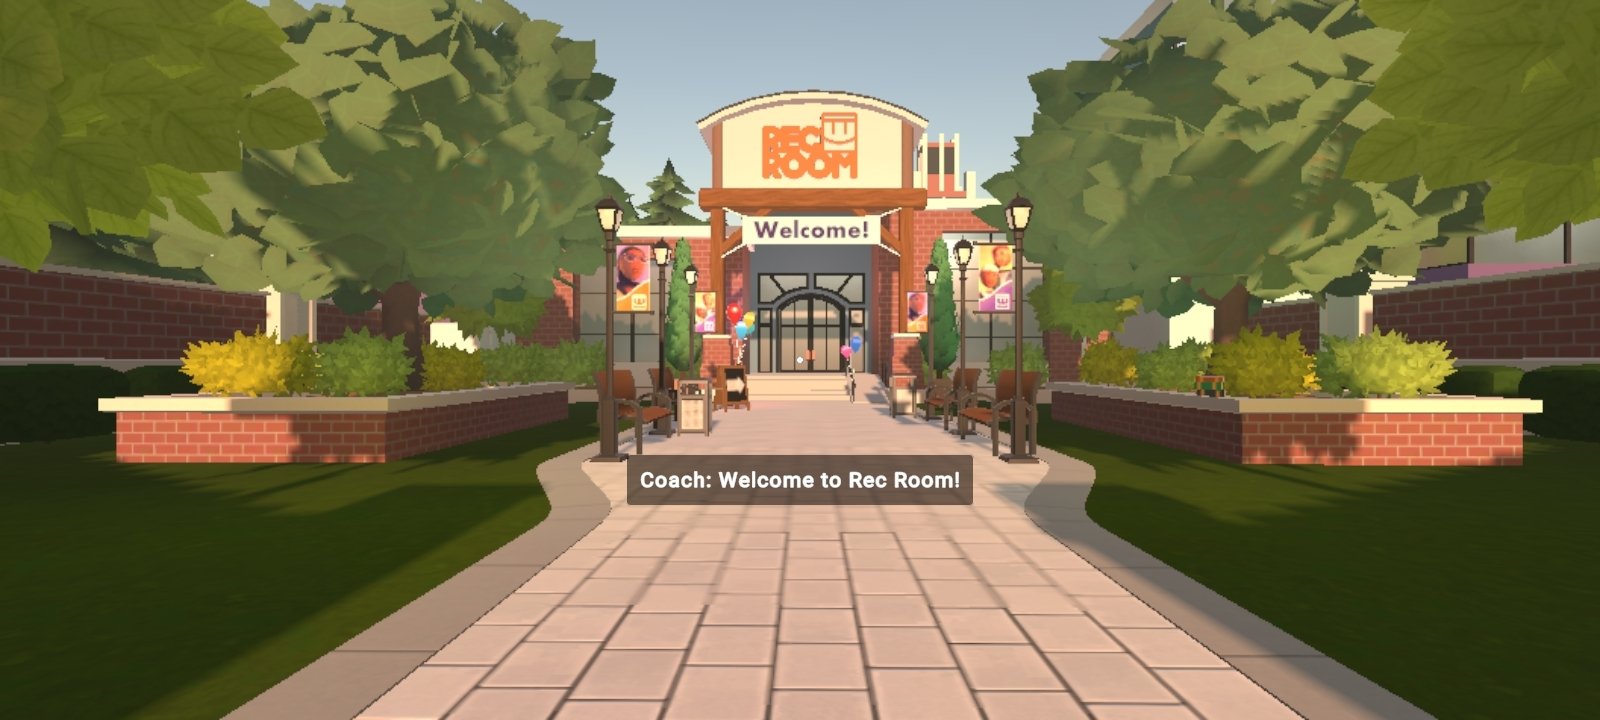 Rec room android